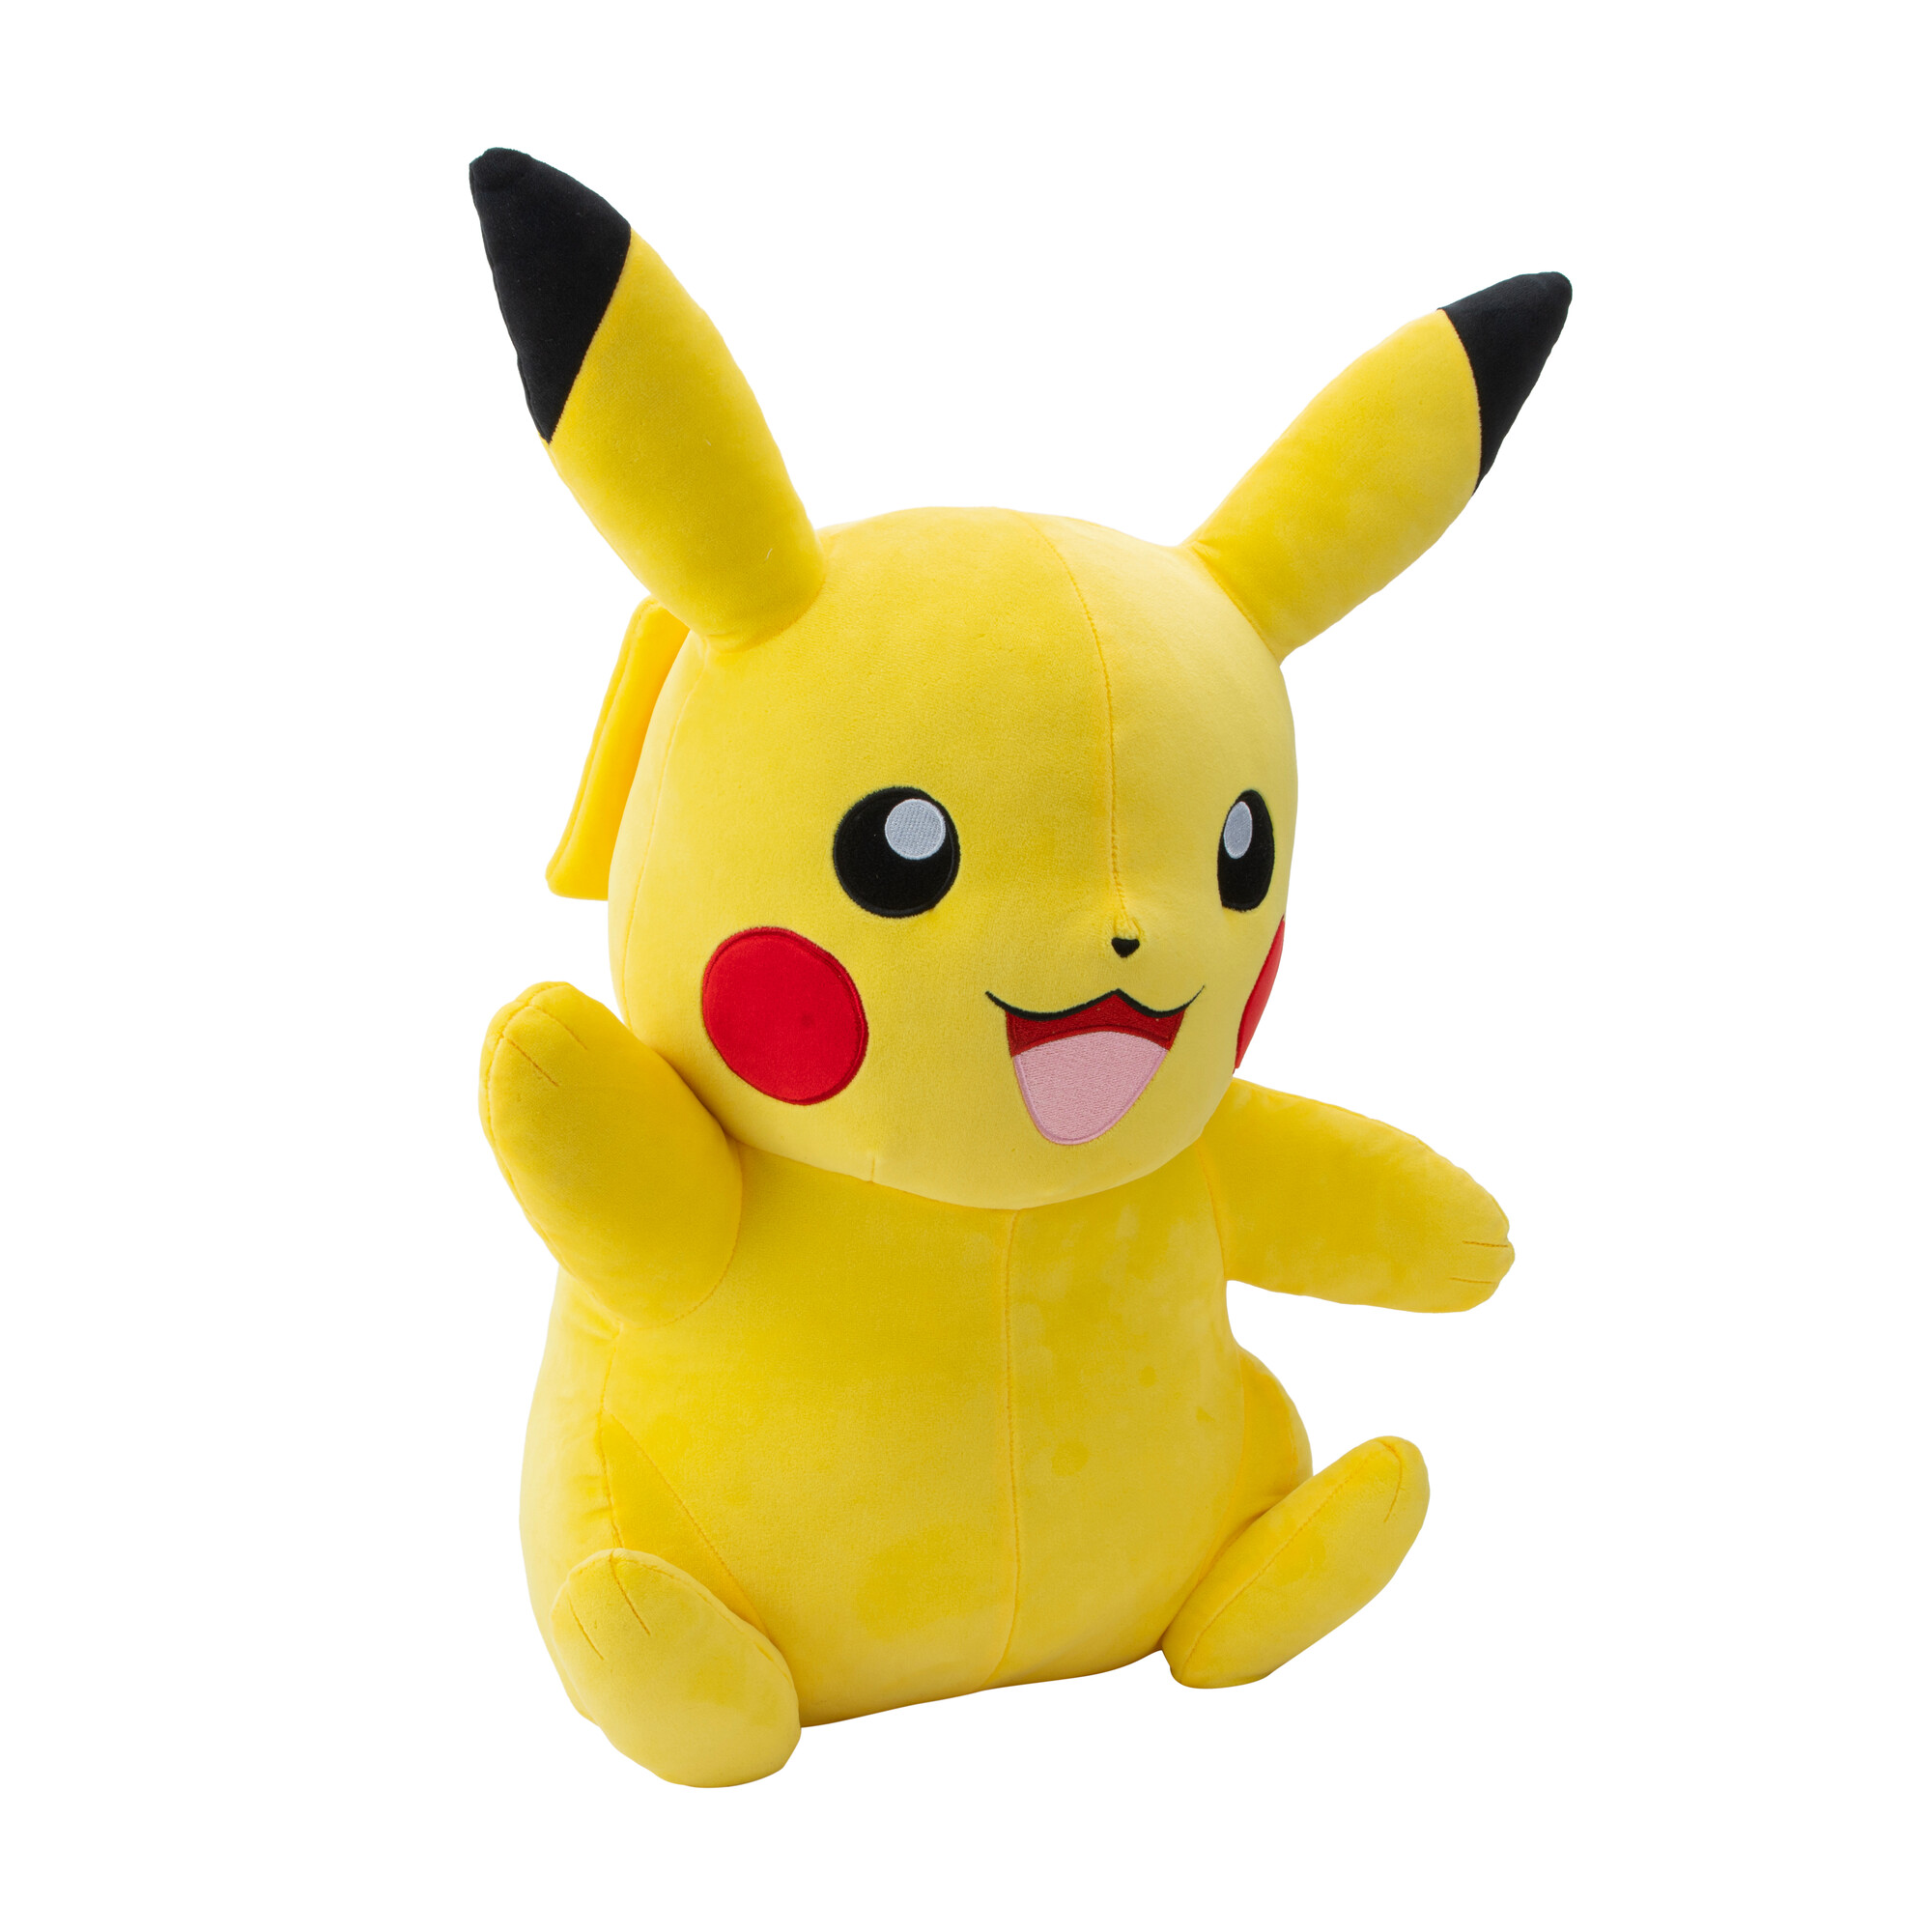 Pokemon Pikachu Plush - 24-inch Child's Plush with Authentic Details - image 4 of 5